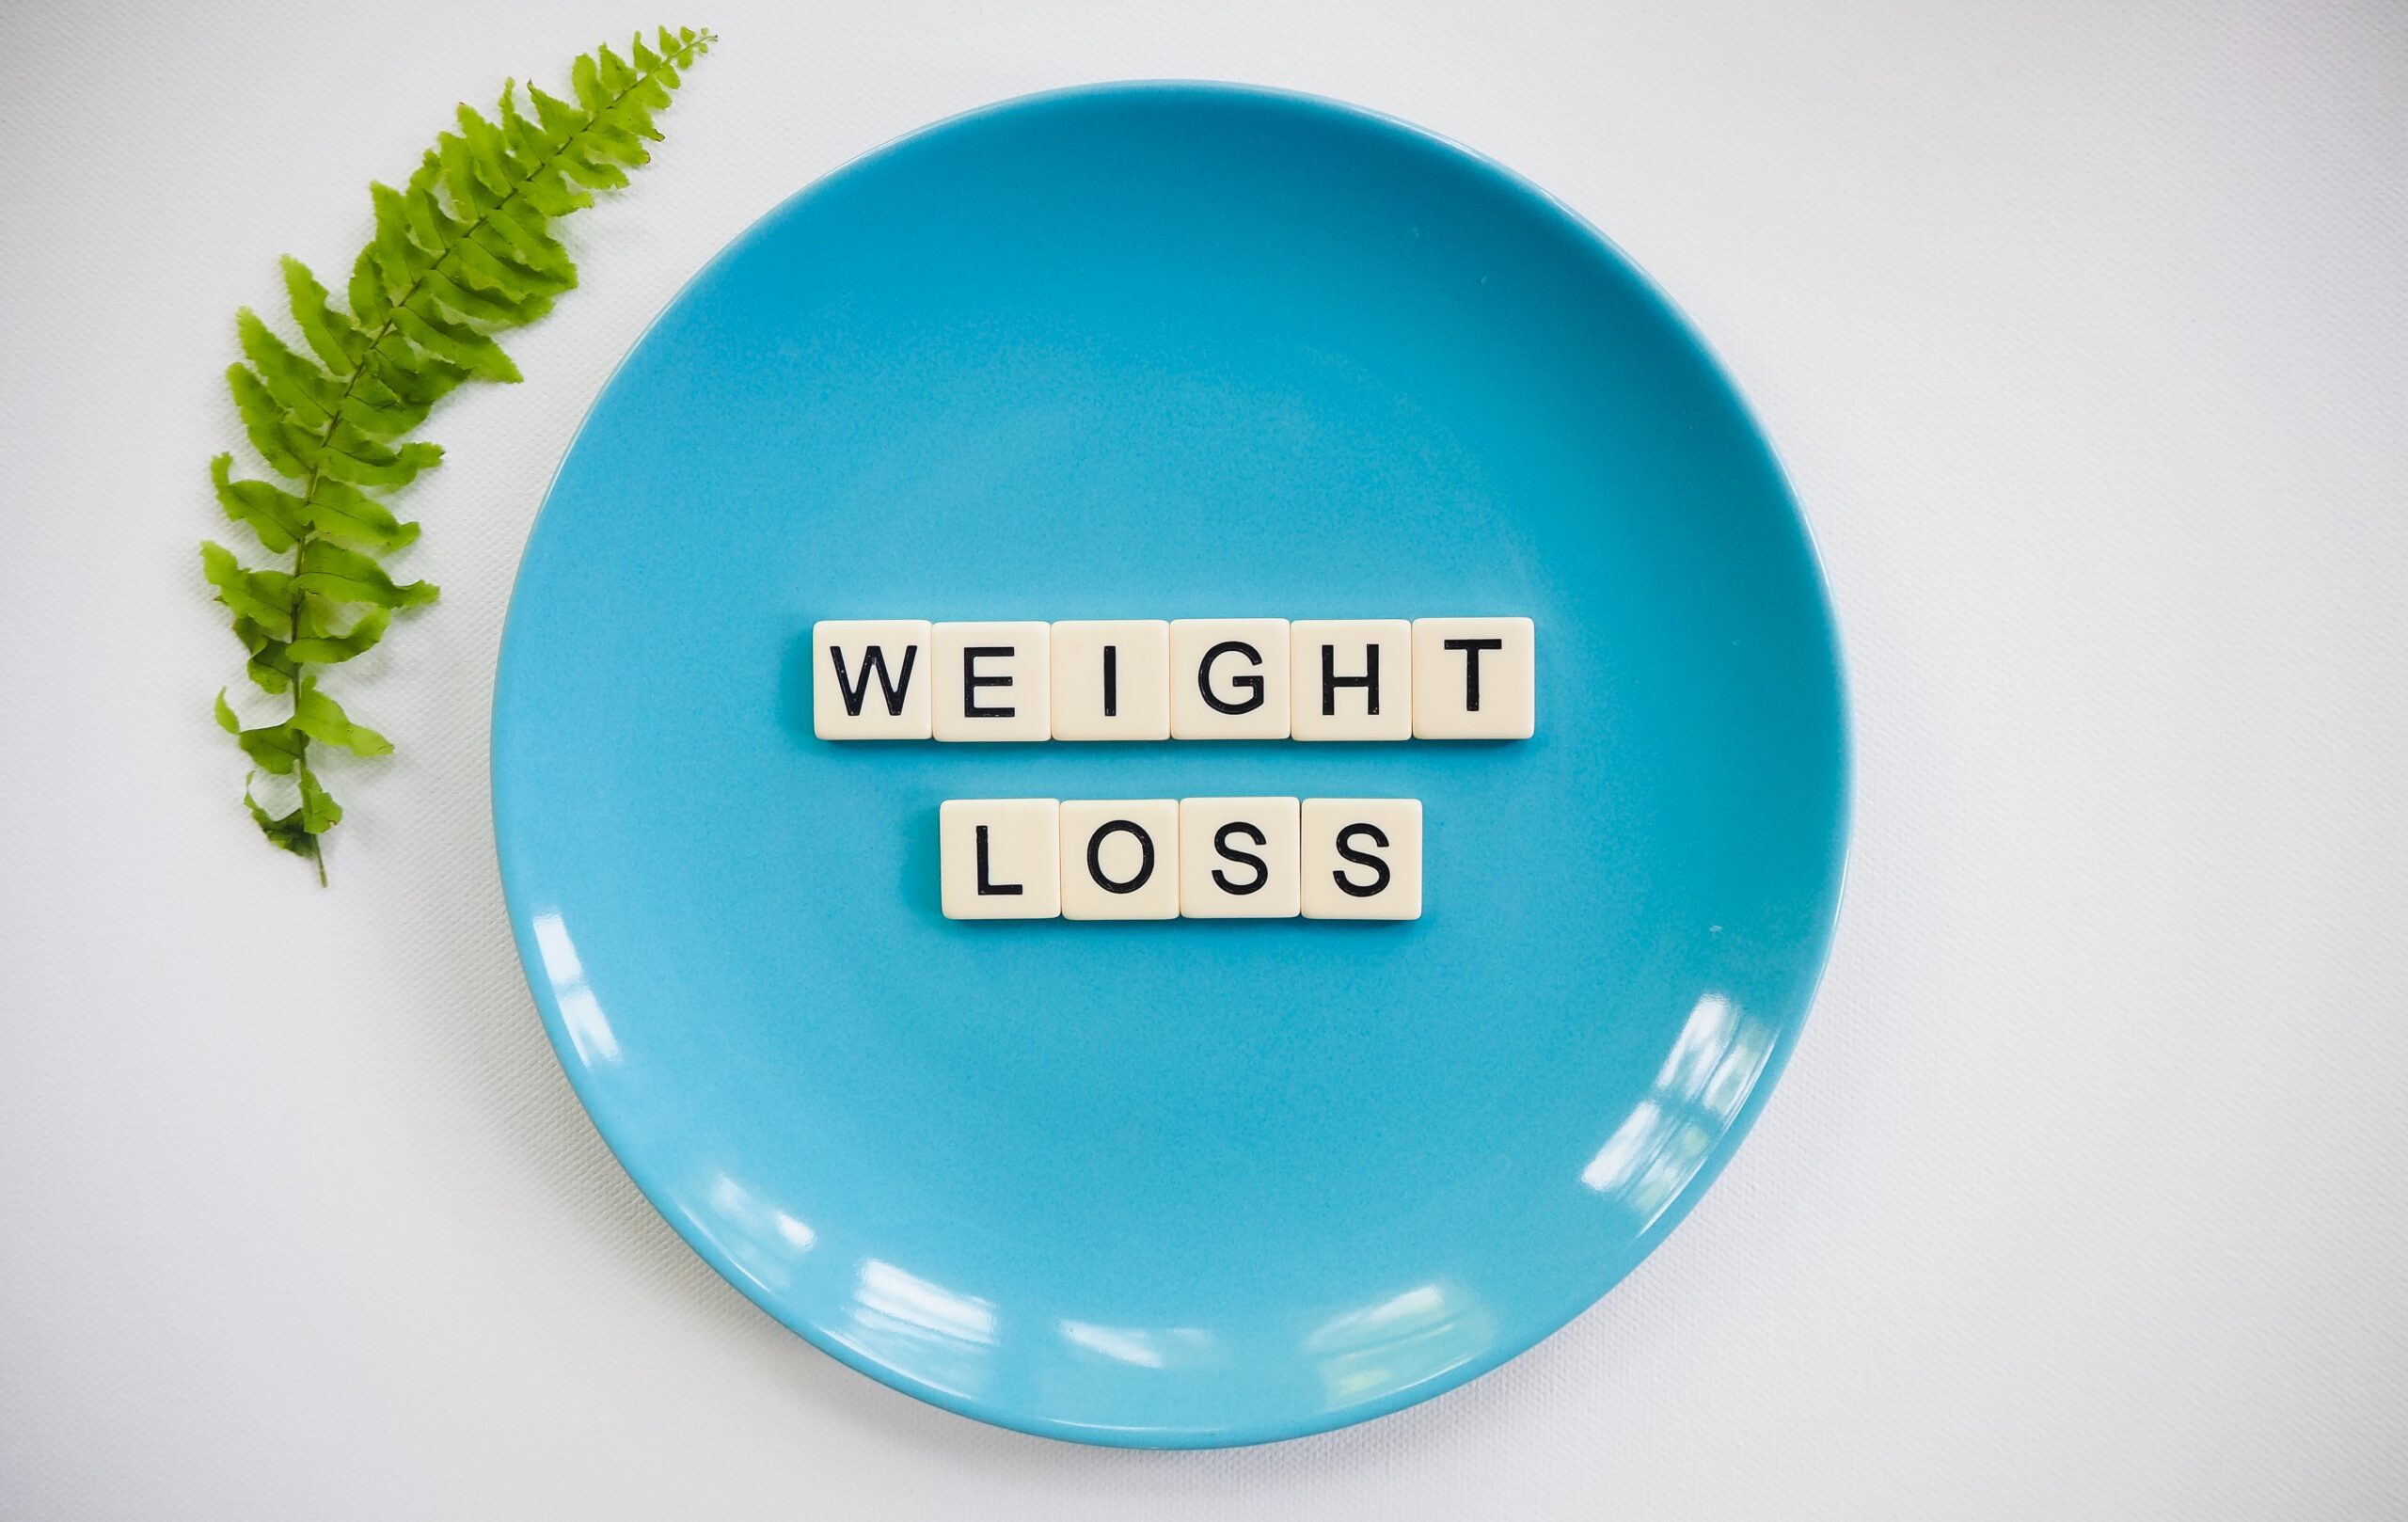 How To Get Back with weight loss